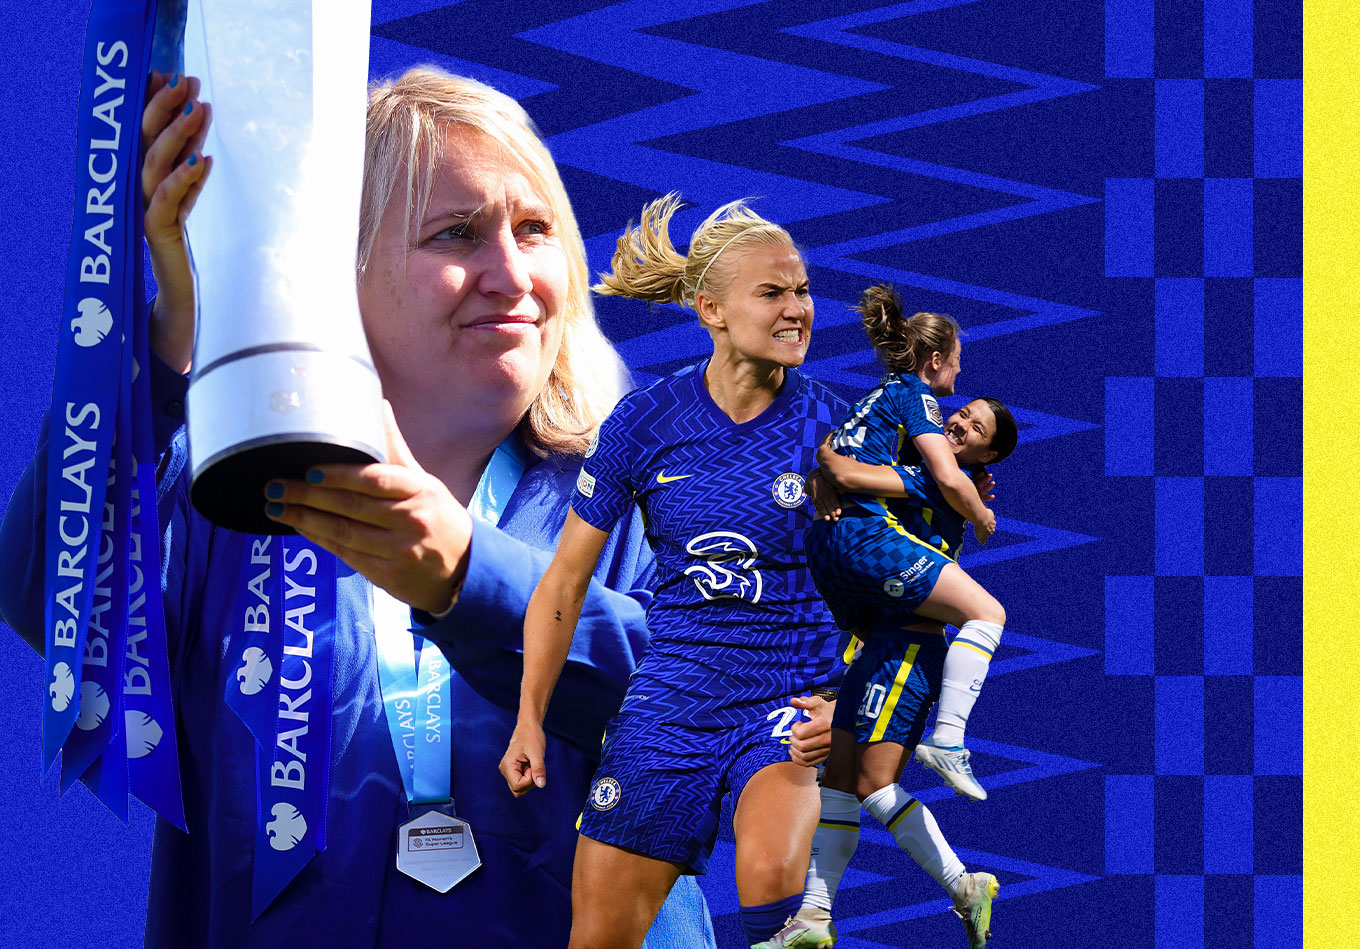 “We Had the Highest Expected Goals”: Chelsea’s WSL Title in Numbers